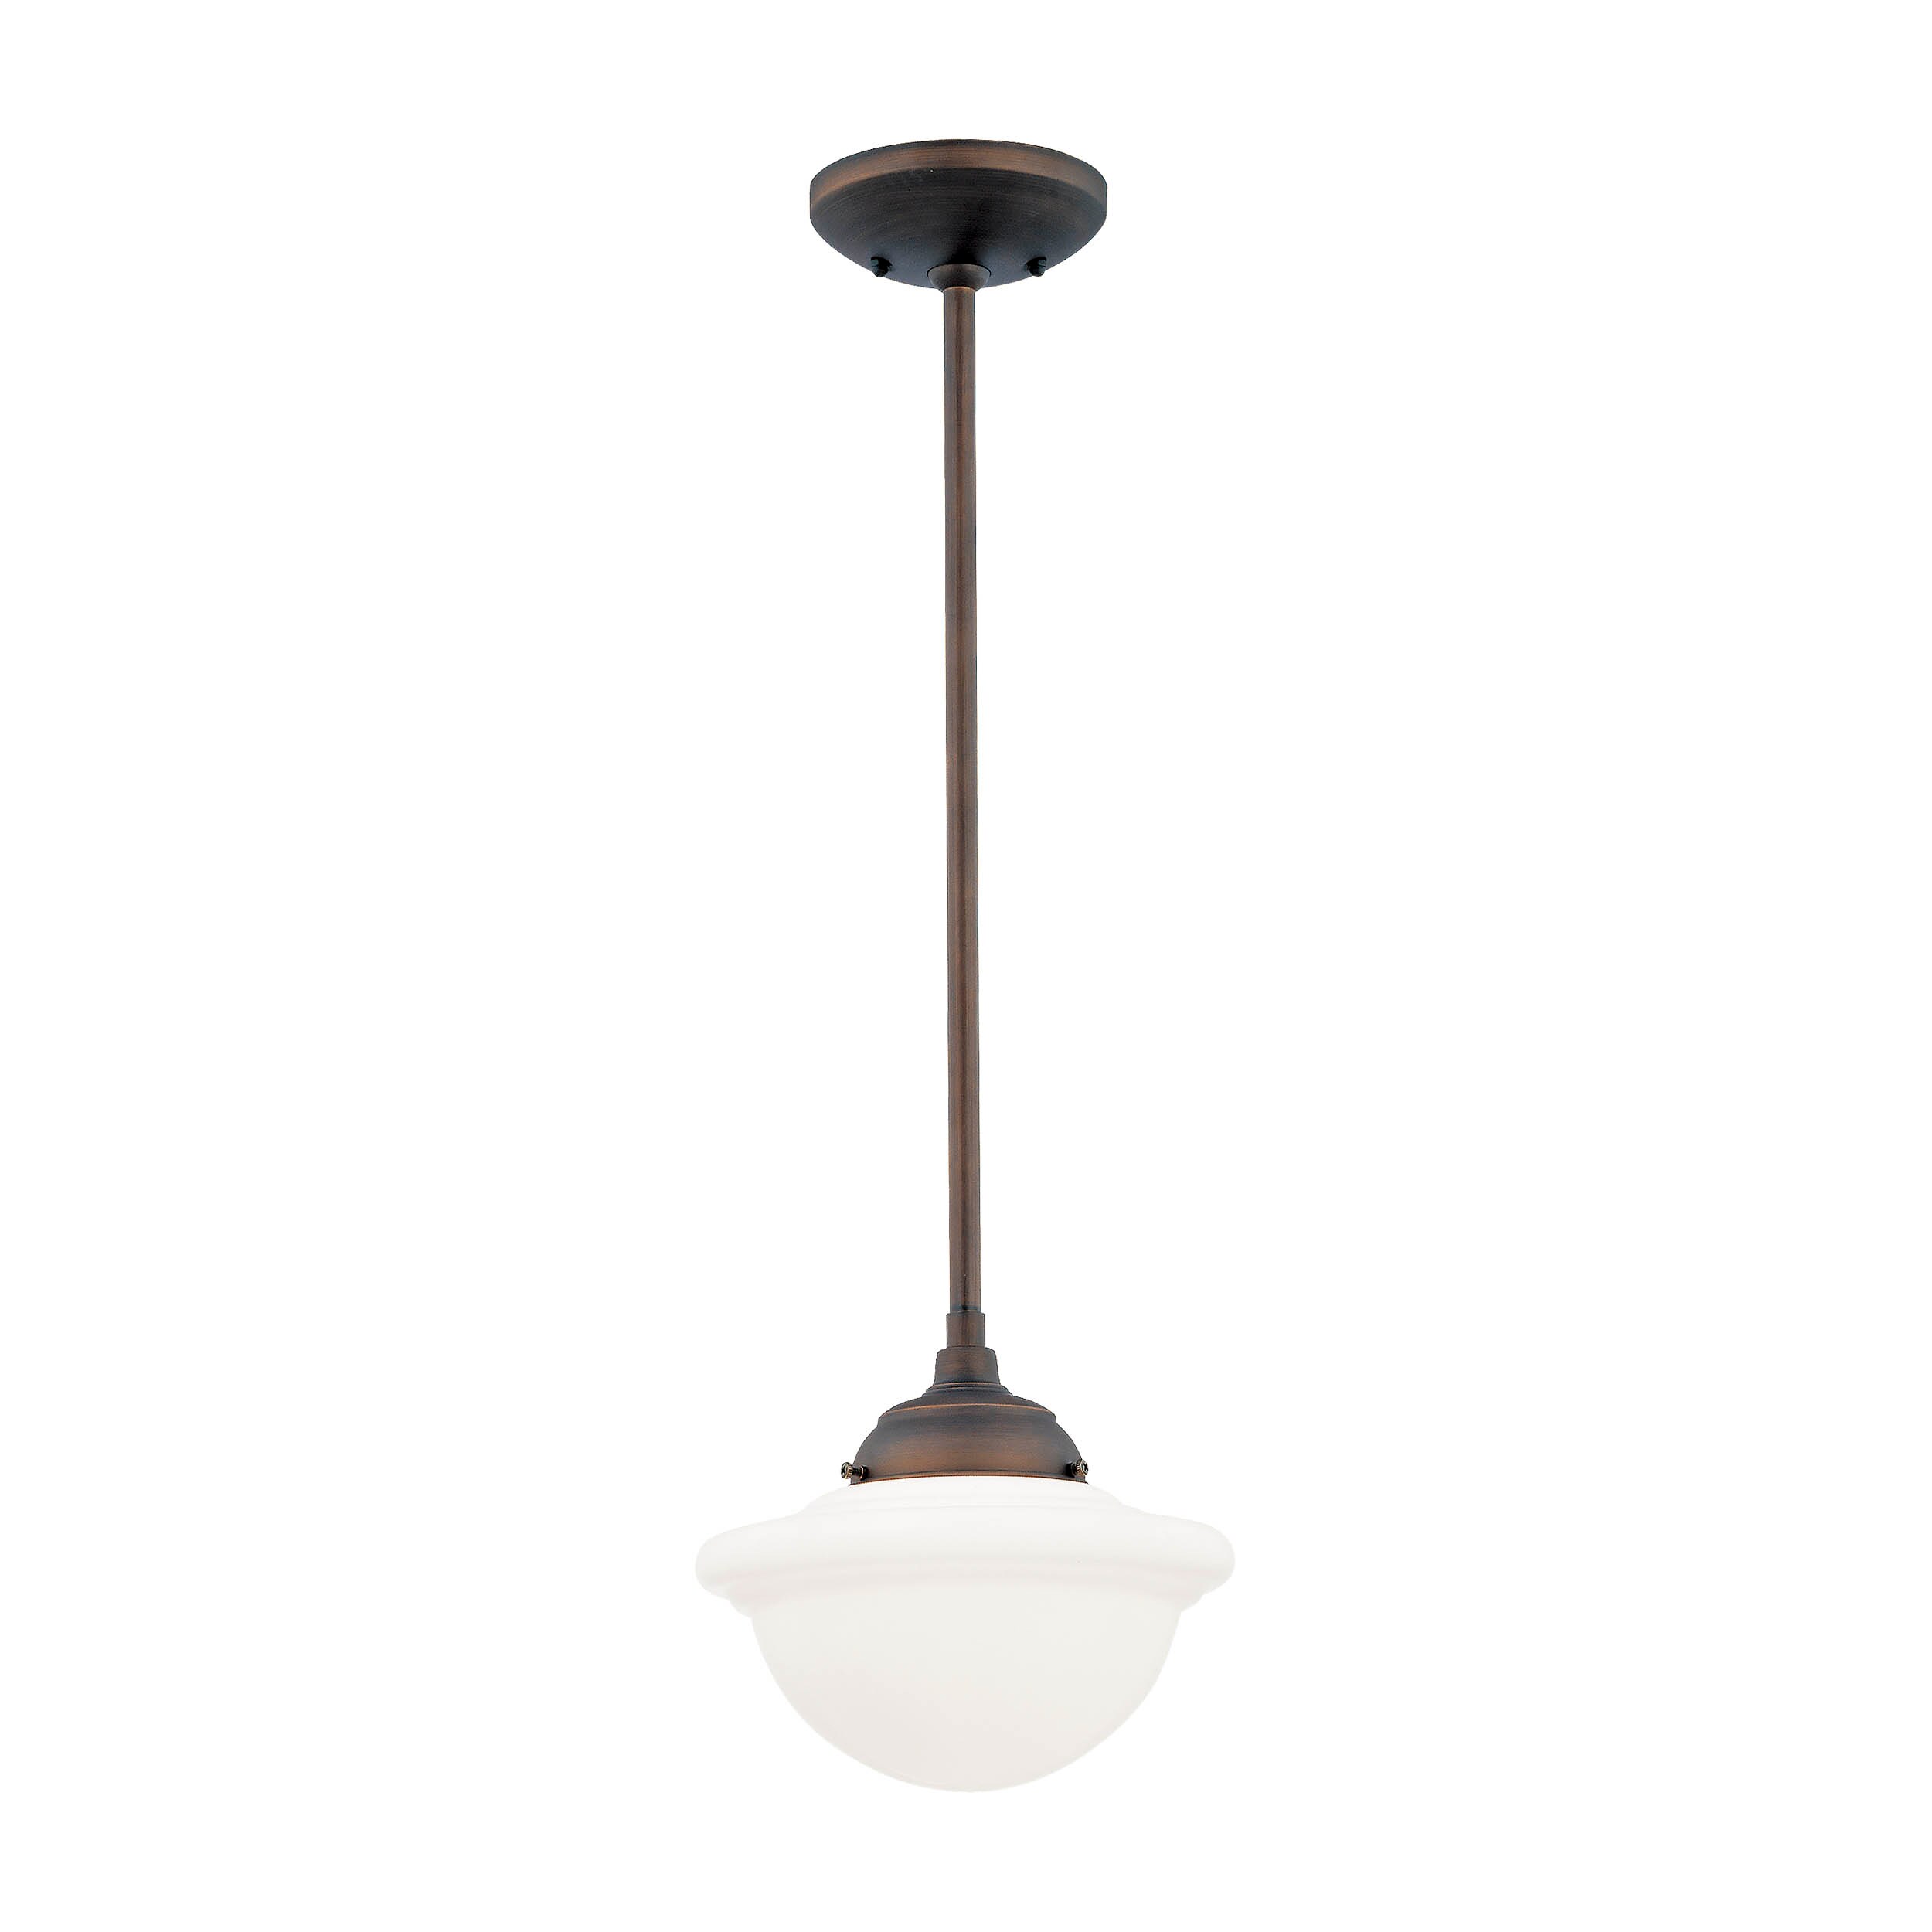 Millennium Lighting Neo-Industrial Rubbed Bronze Traditional Opal Glass Schoolhouse Outdoor Pendant Light